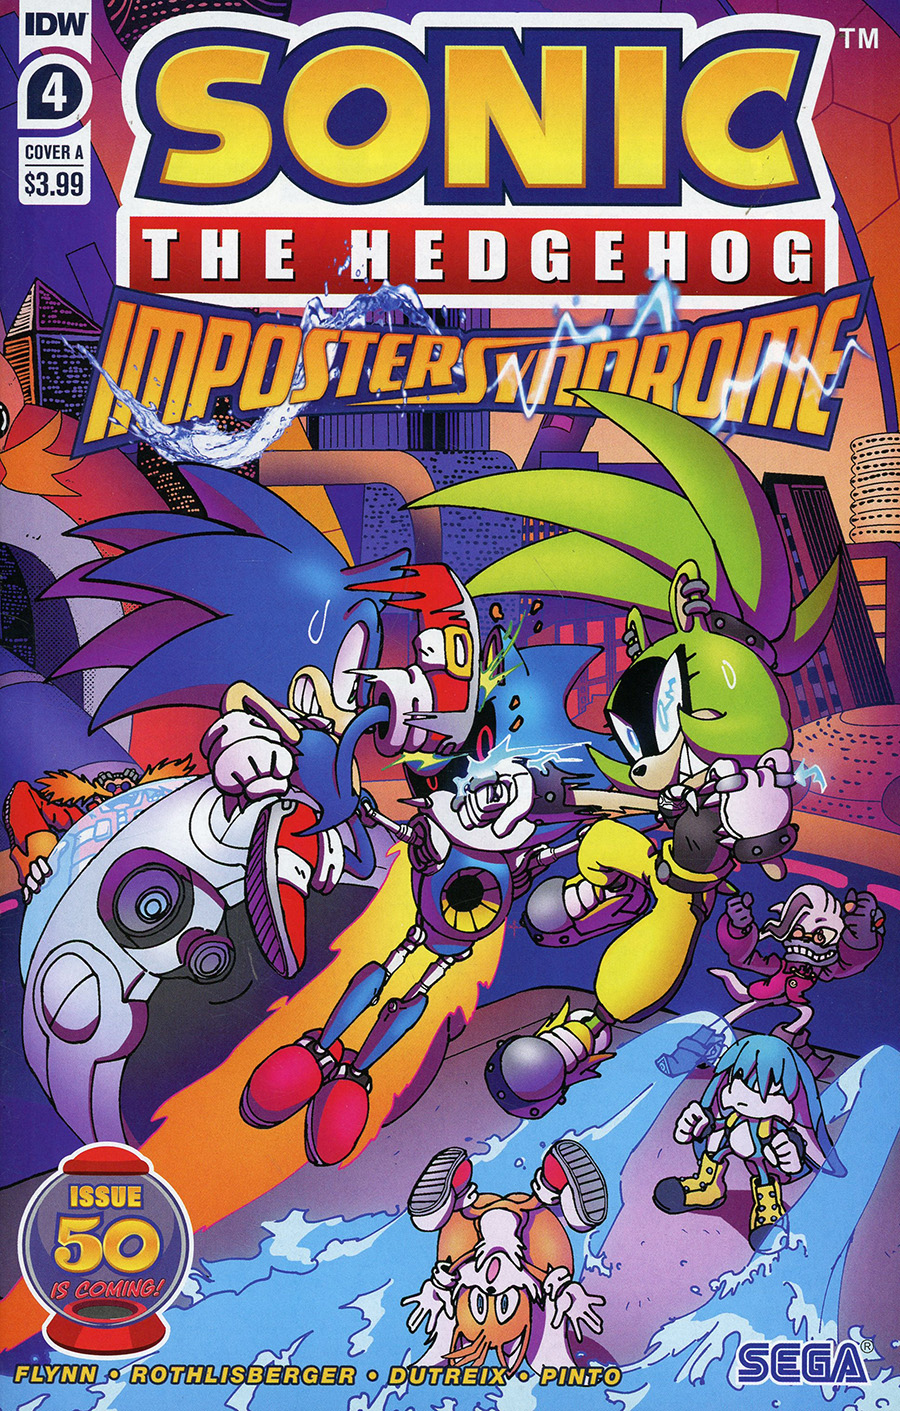 Sonic The Hedgehog Imposter Syndrome #4 Cover A Regular Mauro Fonseca Cover